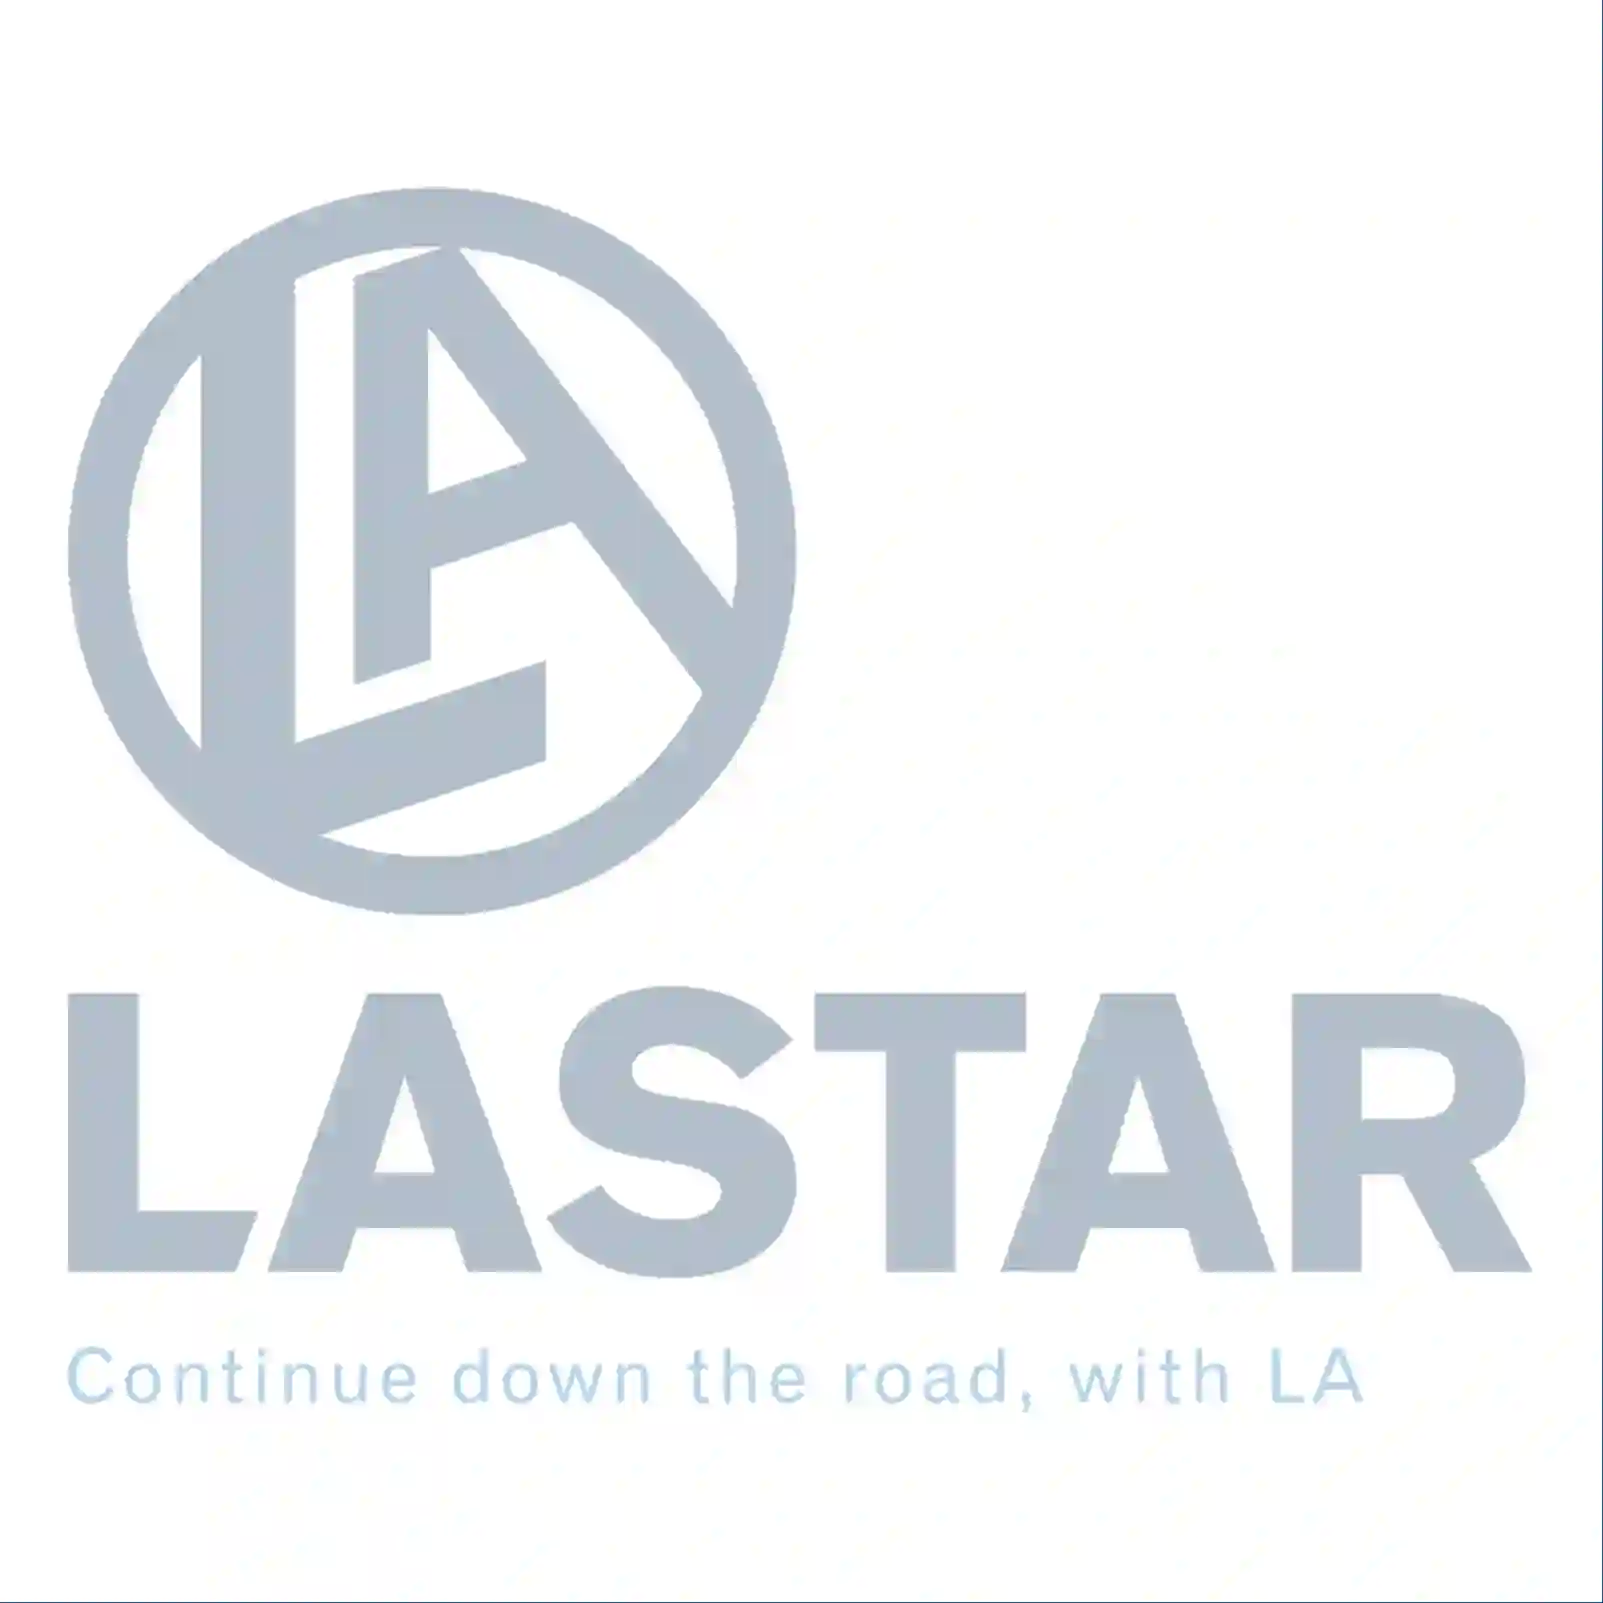  Cover, lateral, left || Lastar Spare Part | Truck Spare Parts, Auotomotive Spare Parts